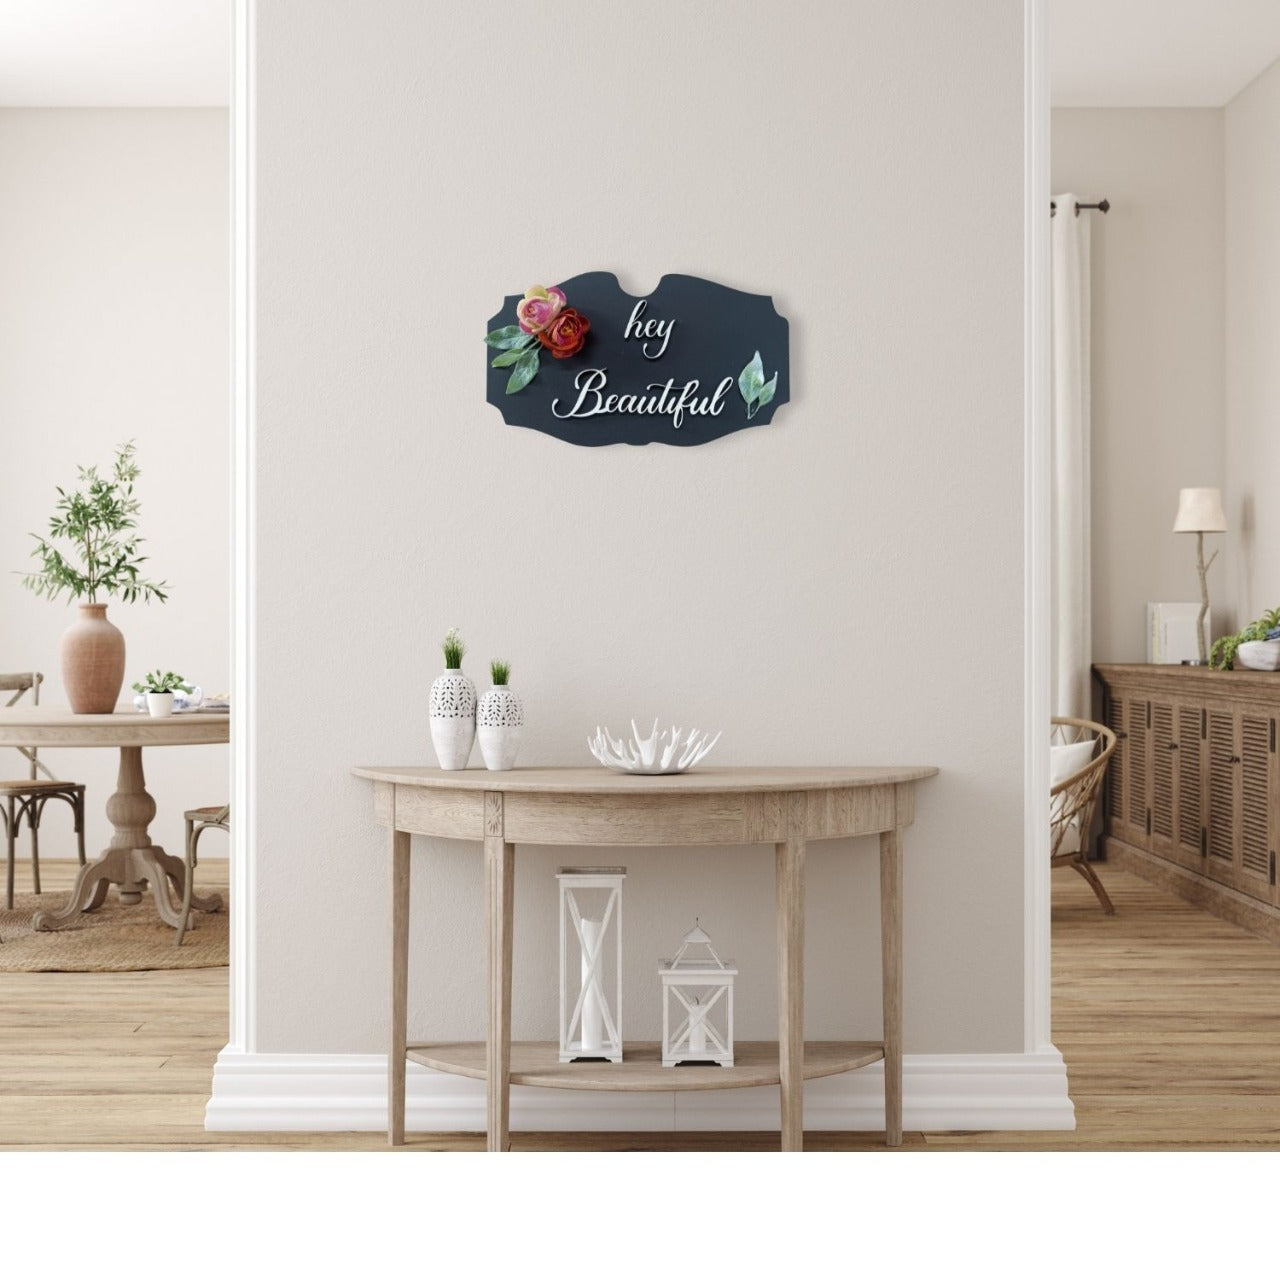 Hey Beautiful 3D Wooden Wall Art With Beautiful Flowers and Leaves